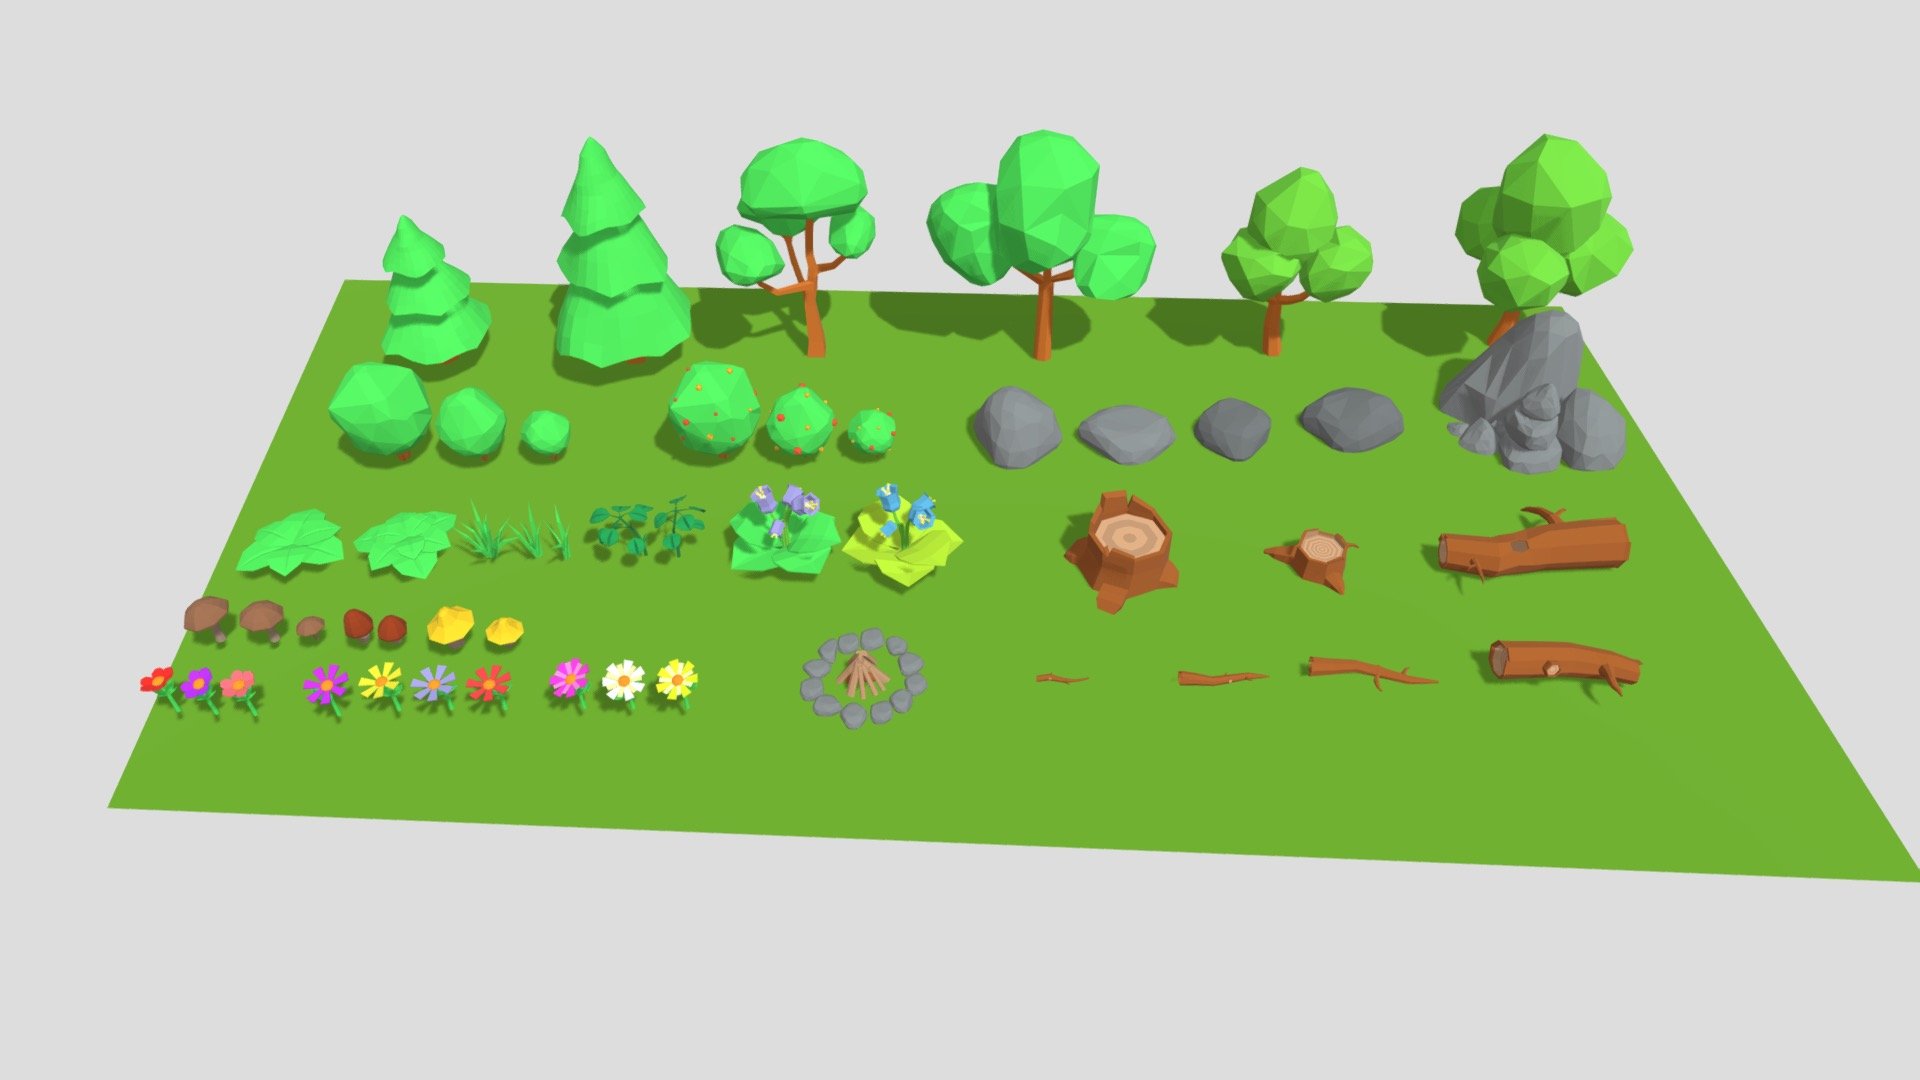 Lowpoly nature pack to create environments for your game.

Package contains:
6x trees
6x bushes
4x stones
1x rock of stones
2x stumps
2x logs
3x brenches
3x simple grass
6x specific bushes
7x flowers
7x mushrooms
1x fireplace - Lowpoly nature - 3D model by Vic_miles 3d model